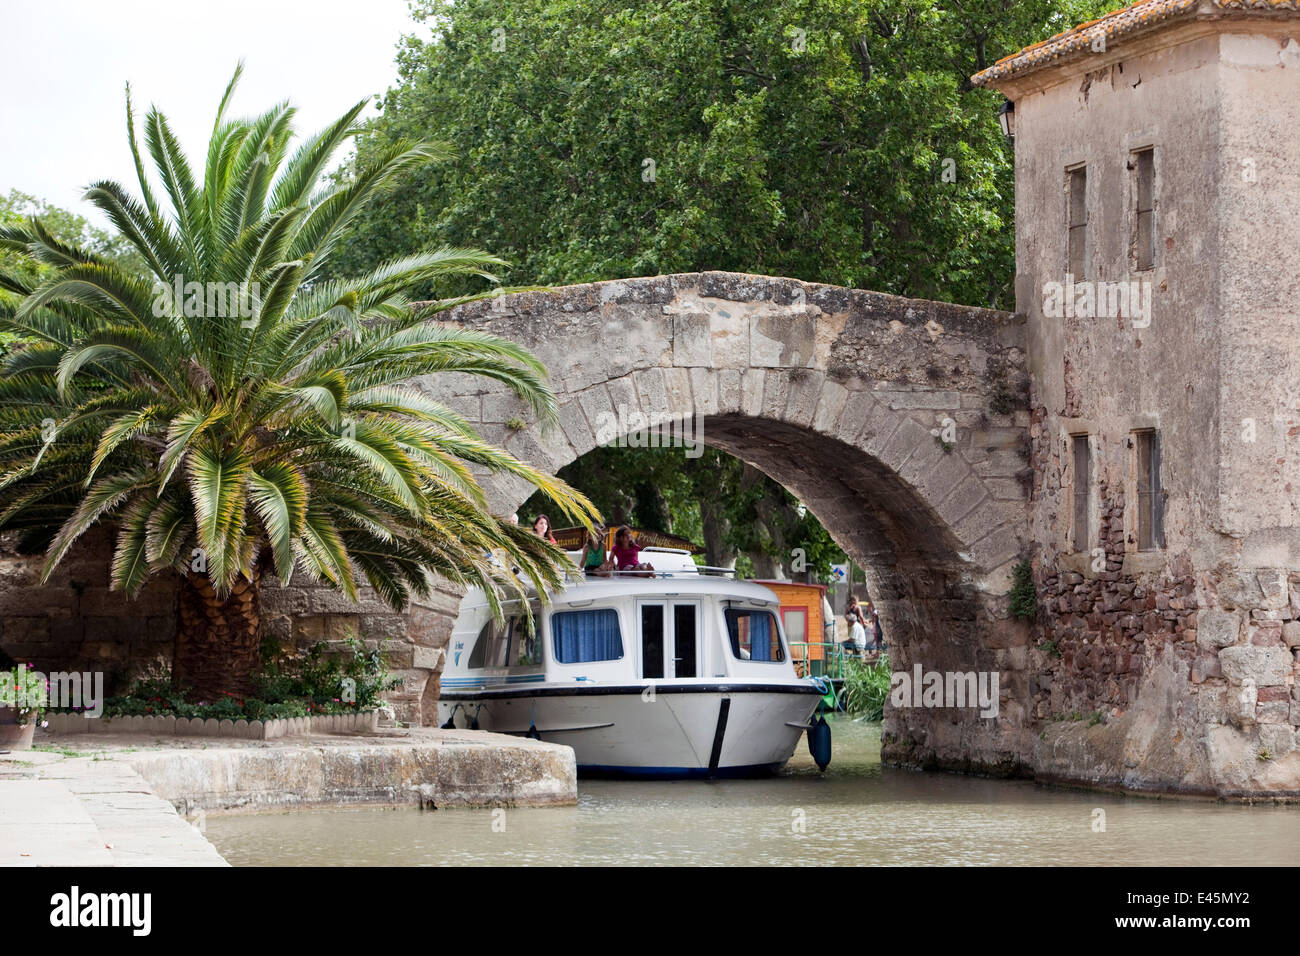 Boat passing under a bridge on the Canal Du Midi, Le Somail, France. July 2009. Model released. Stock Photo